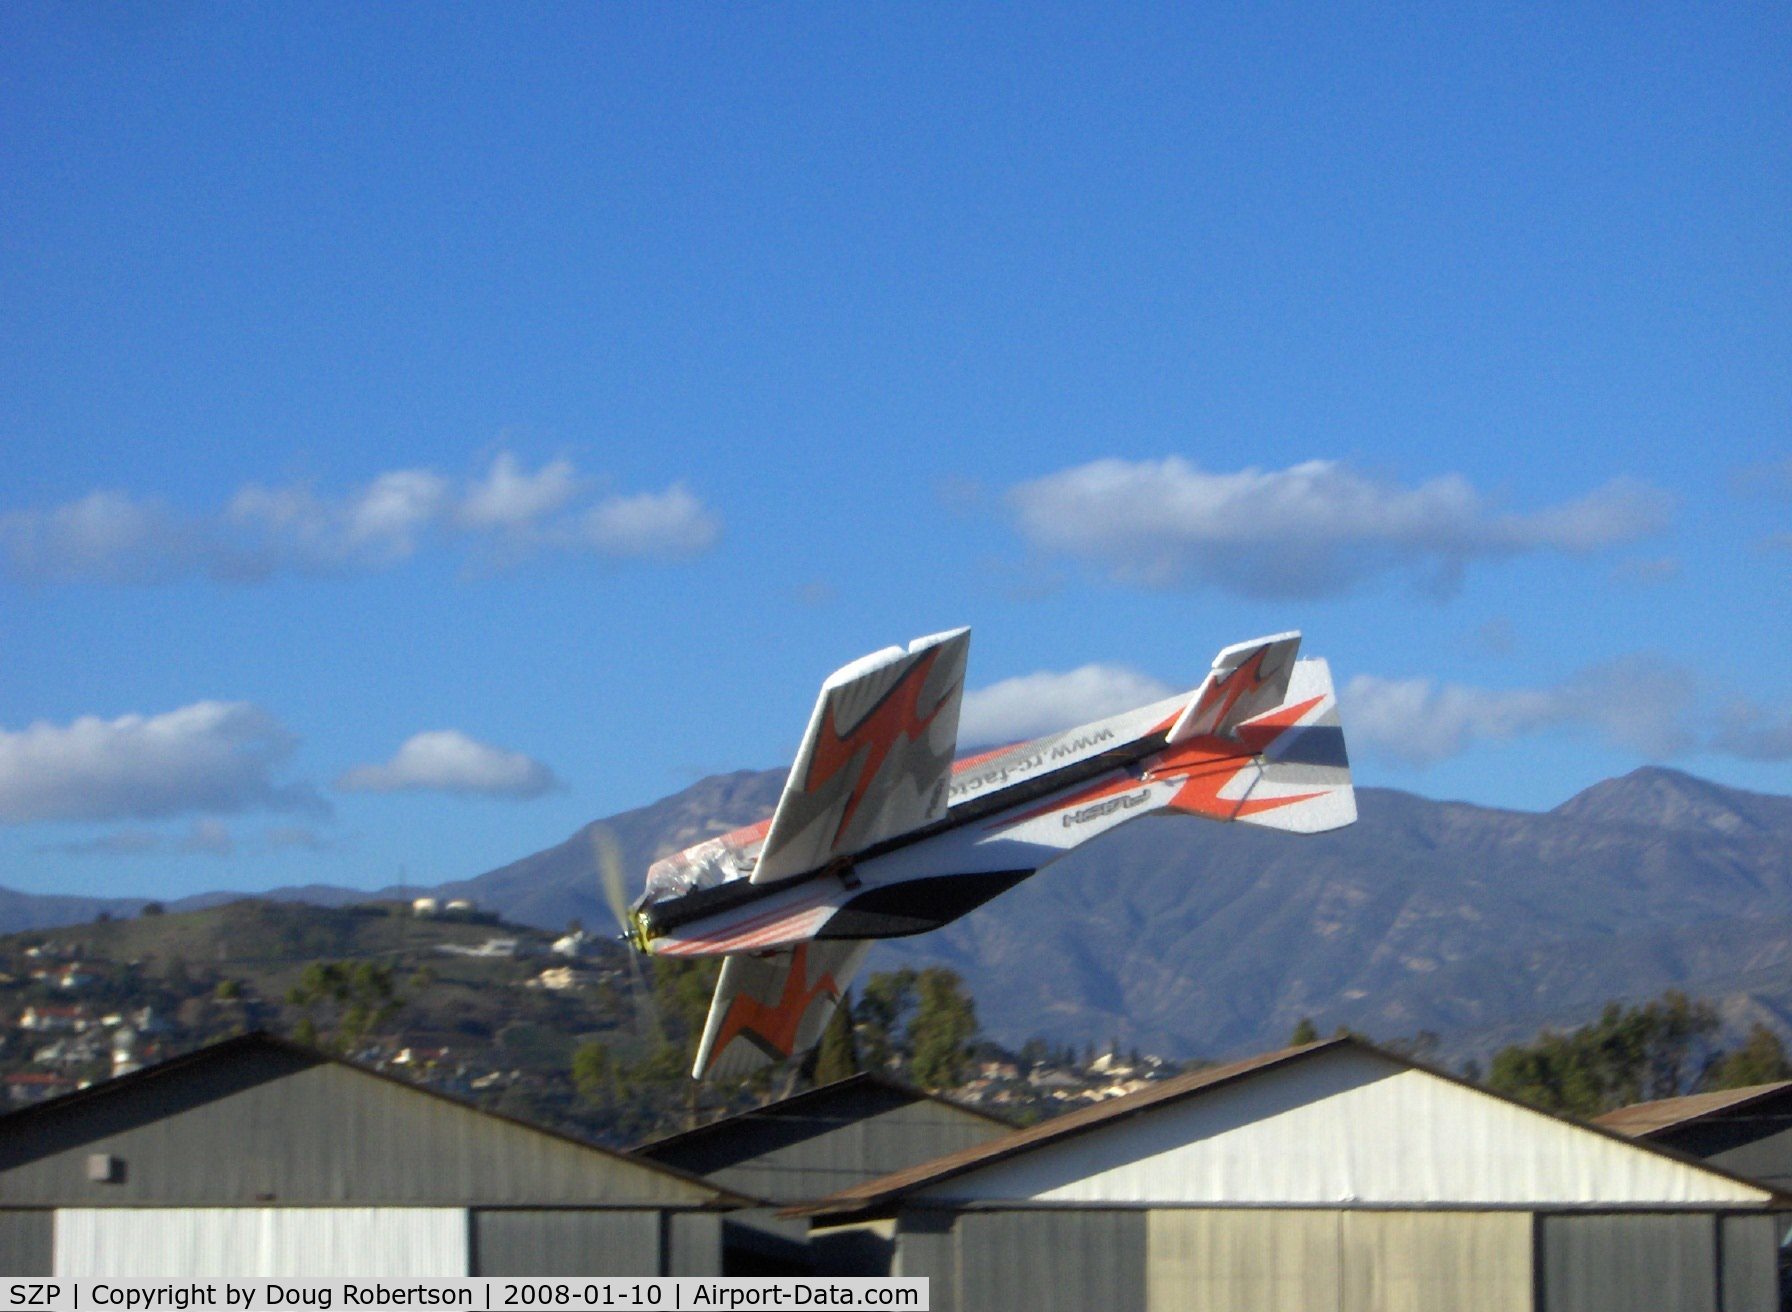 Santa Paula Airport (SZP) - RC Drone 'FLASH' extreme aerobatic, spectacular inverted dive near ground-this was skillfully recovered from without a crash